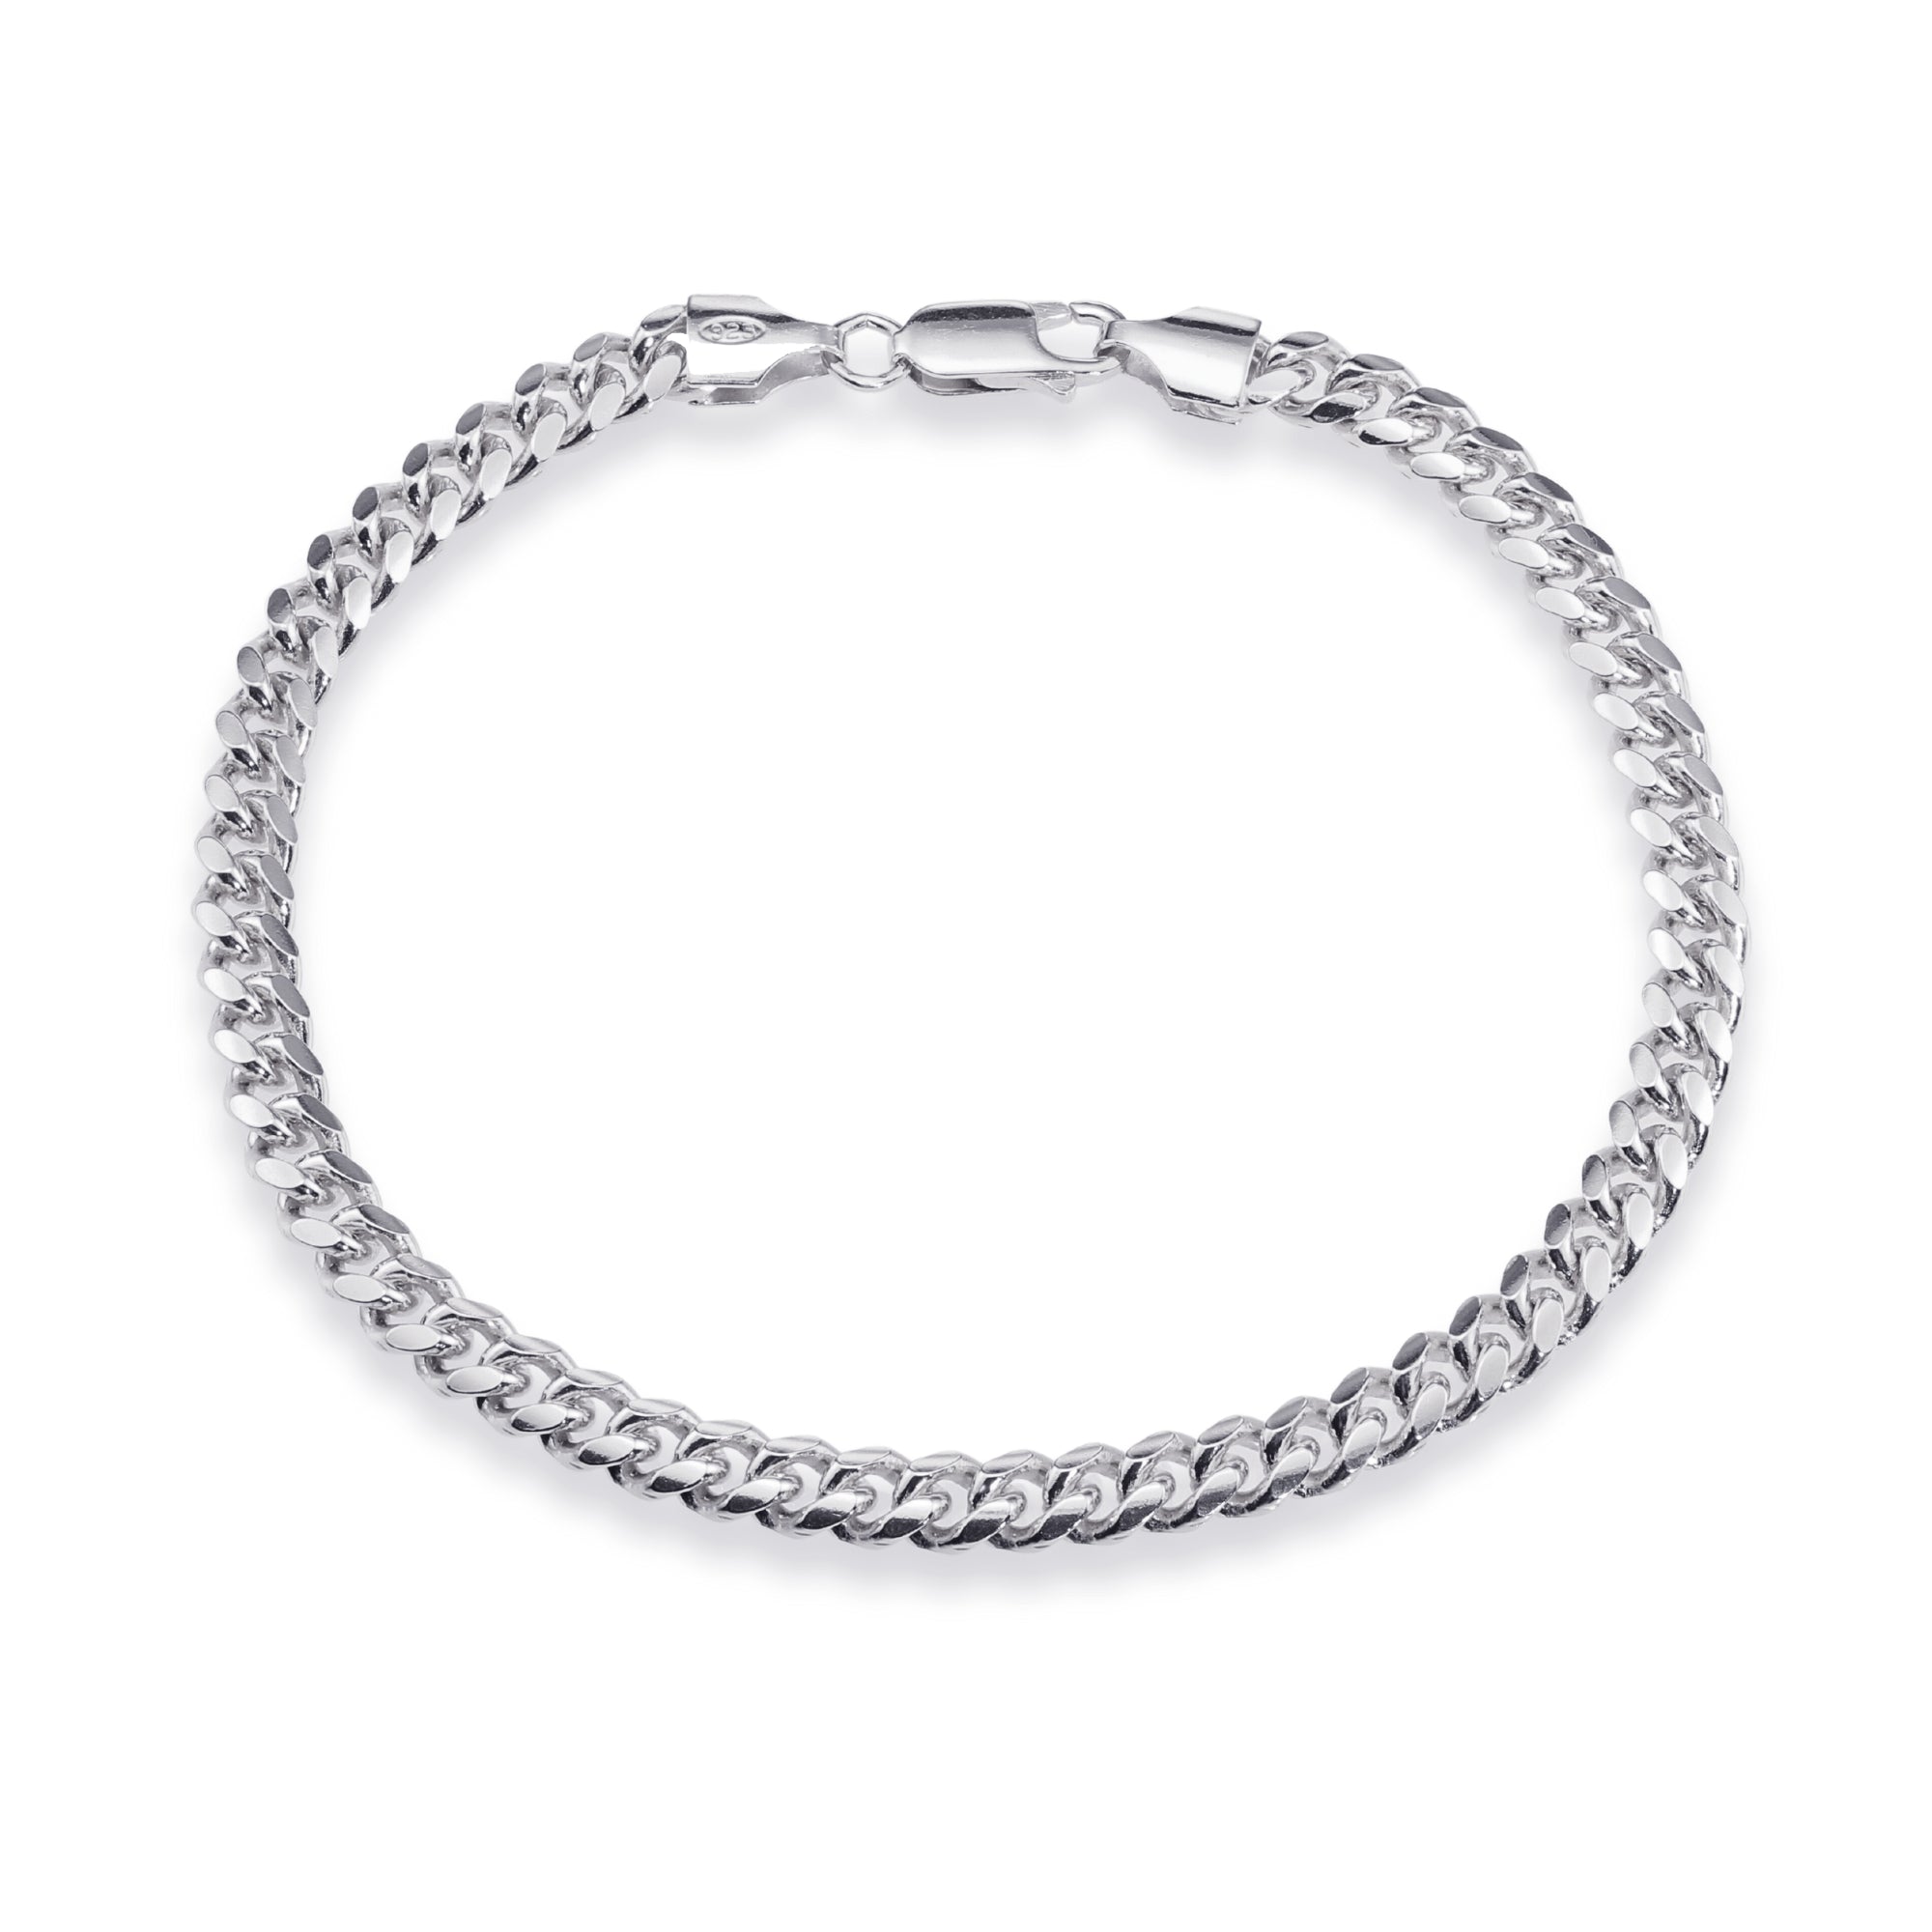 Miami Cuban Link Bracelet in Solid , Available in 8 inches or Adjustable Length 7 to 8 inches, Made In Italy in Sterling Silver